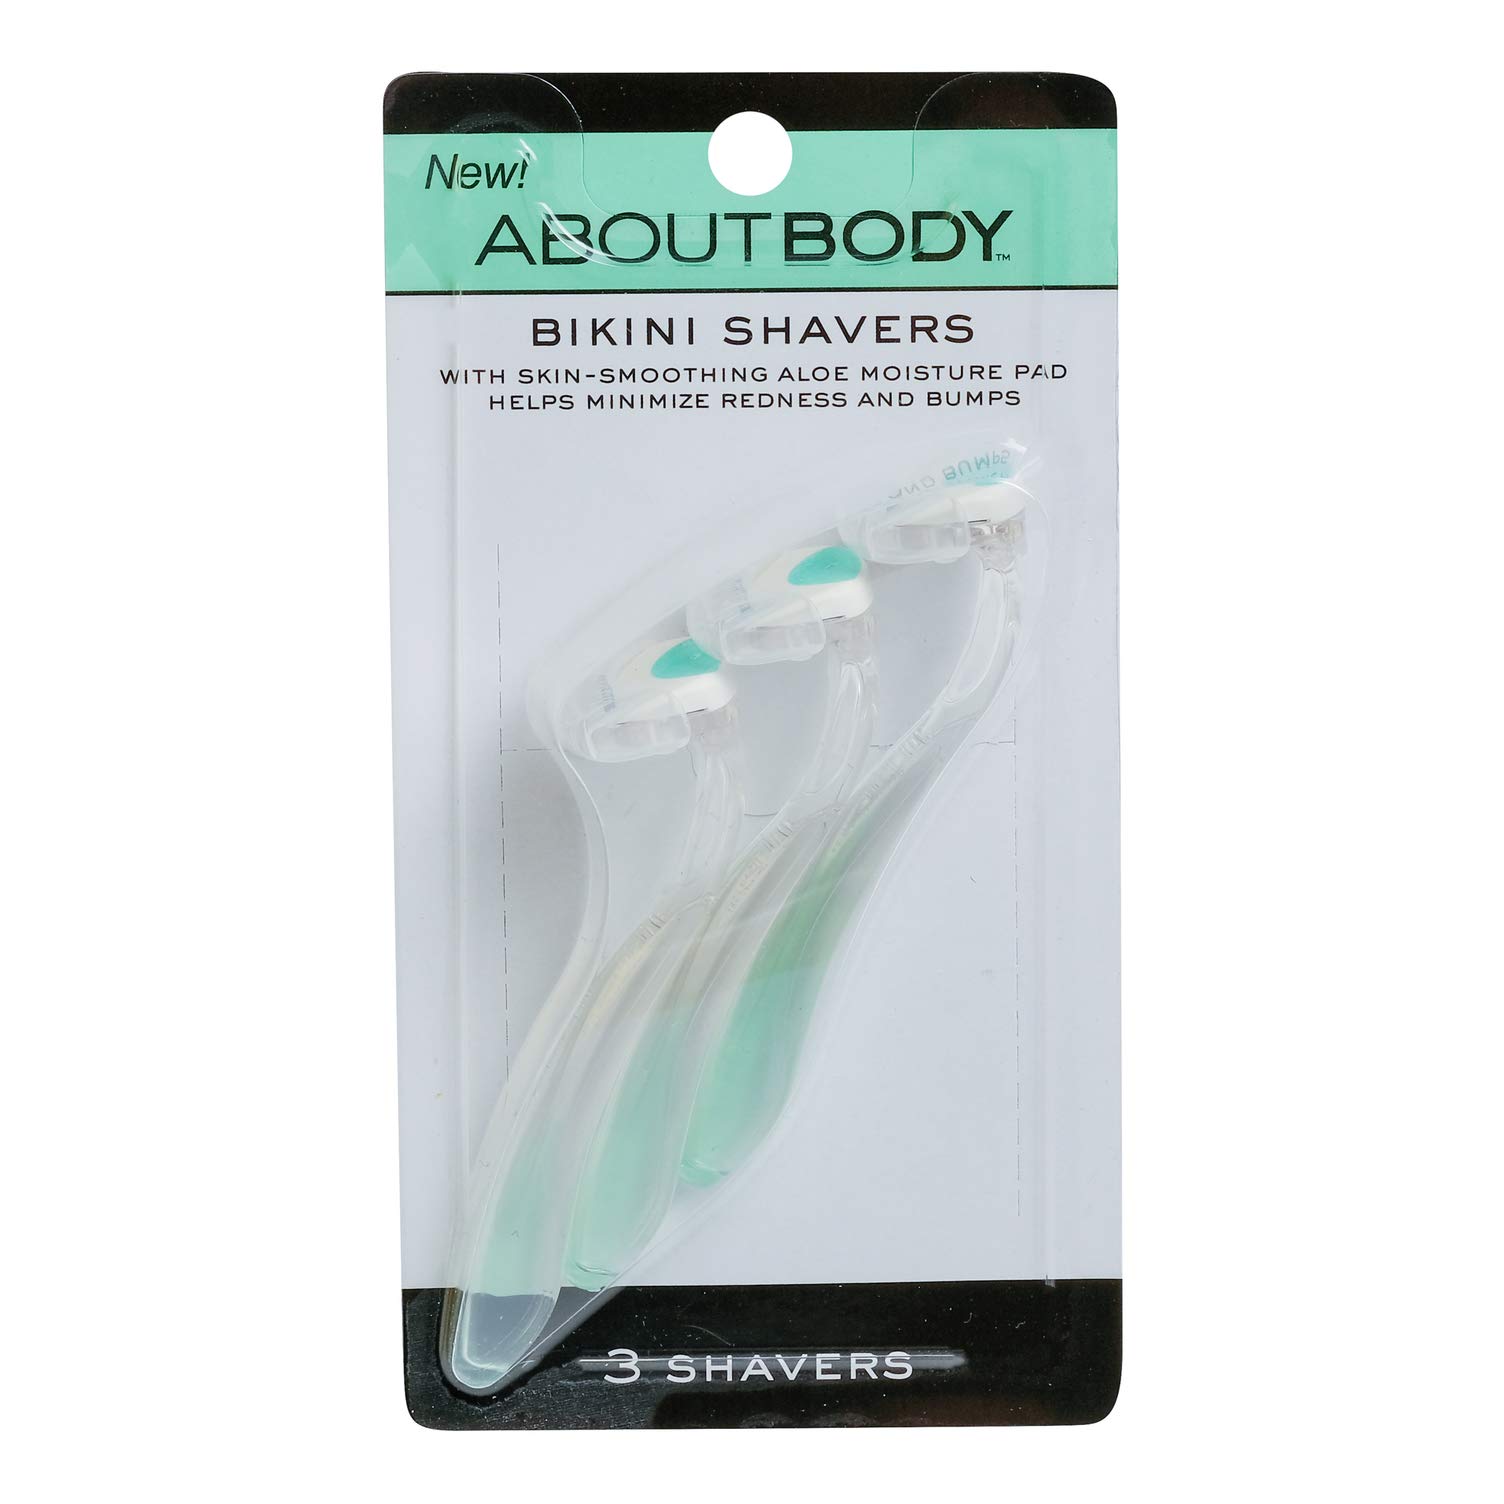 Kai About Body Bikini Shavers - Gentle Razors for Shaving, Trimming & Exfoliating - Includes 3 Beauty Groomers